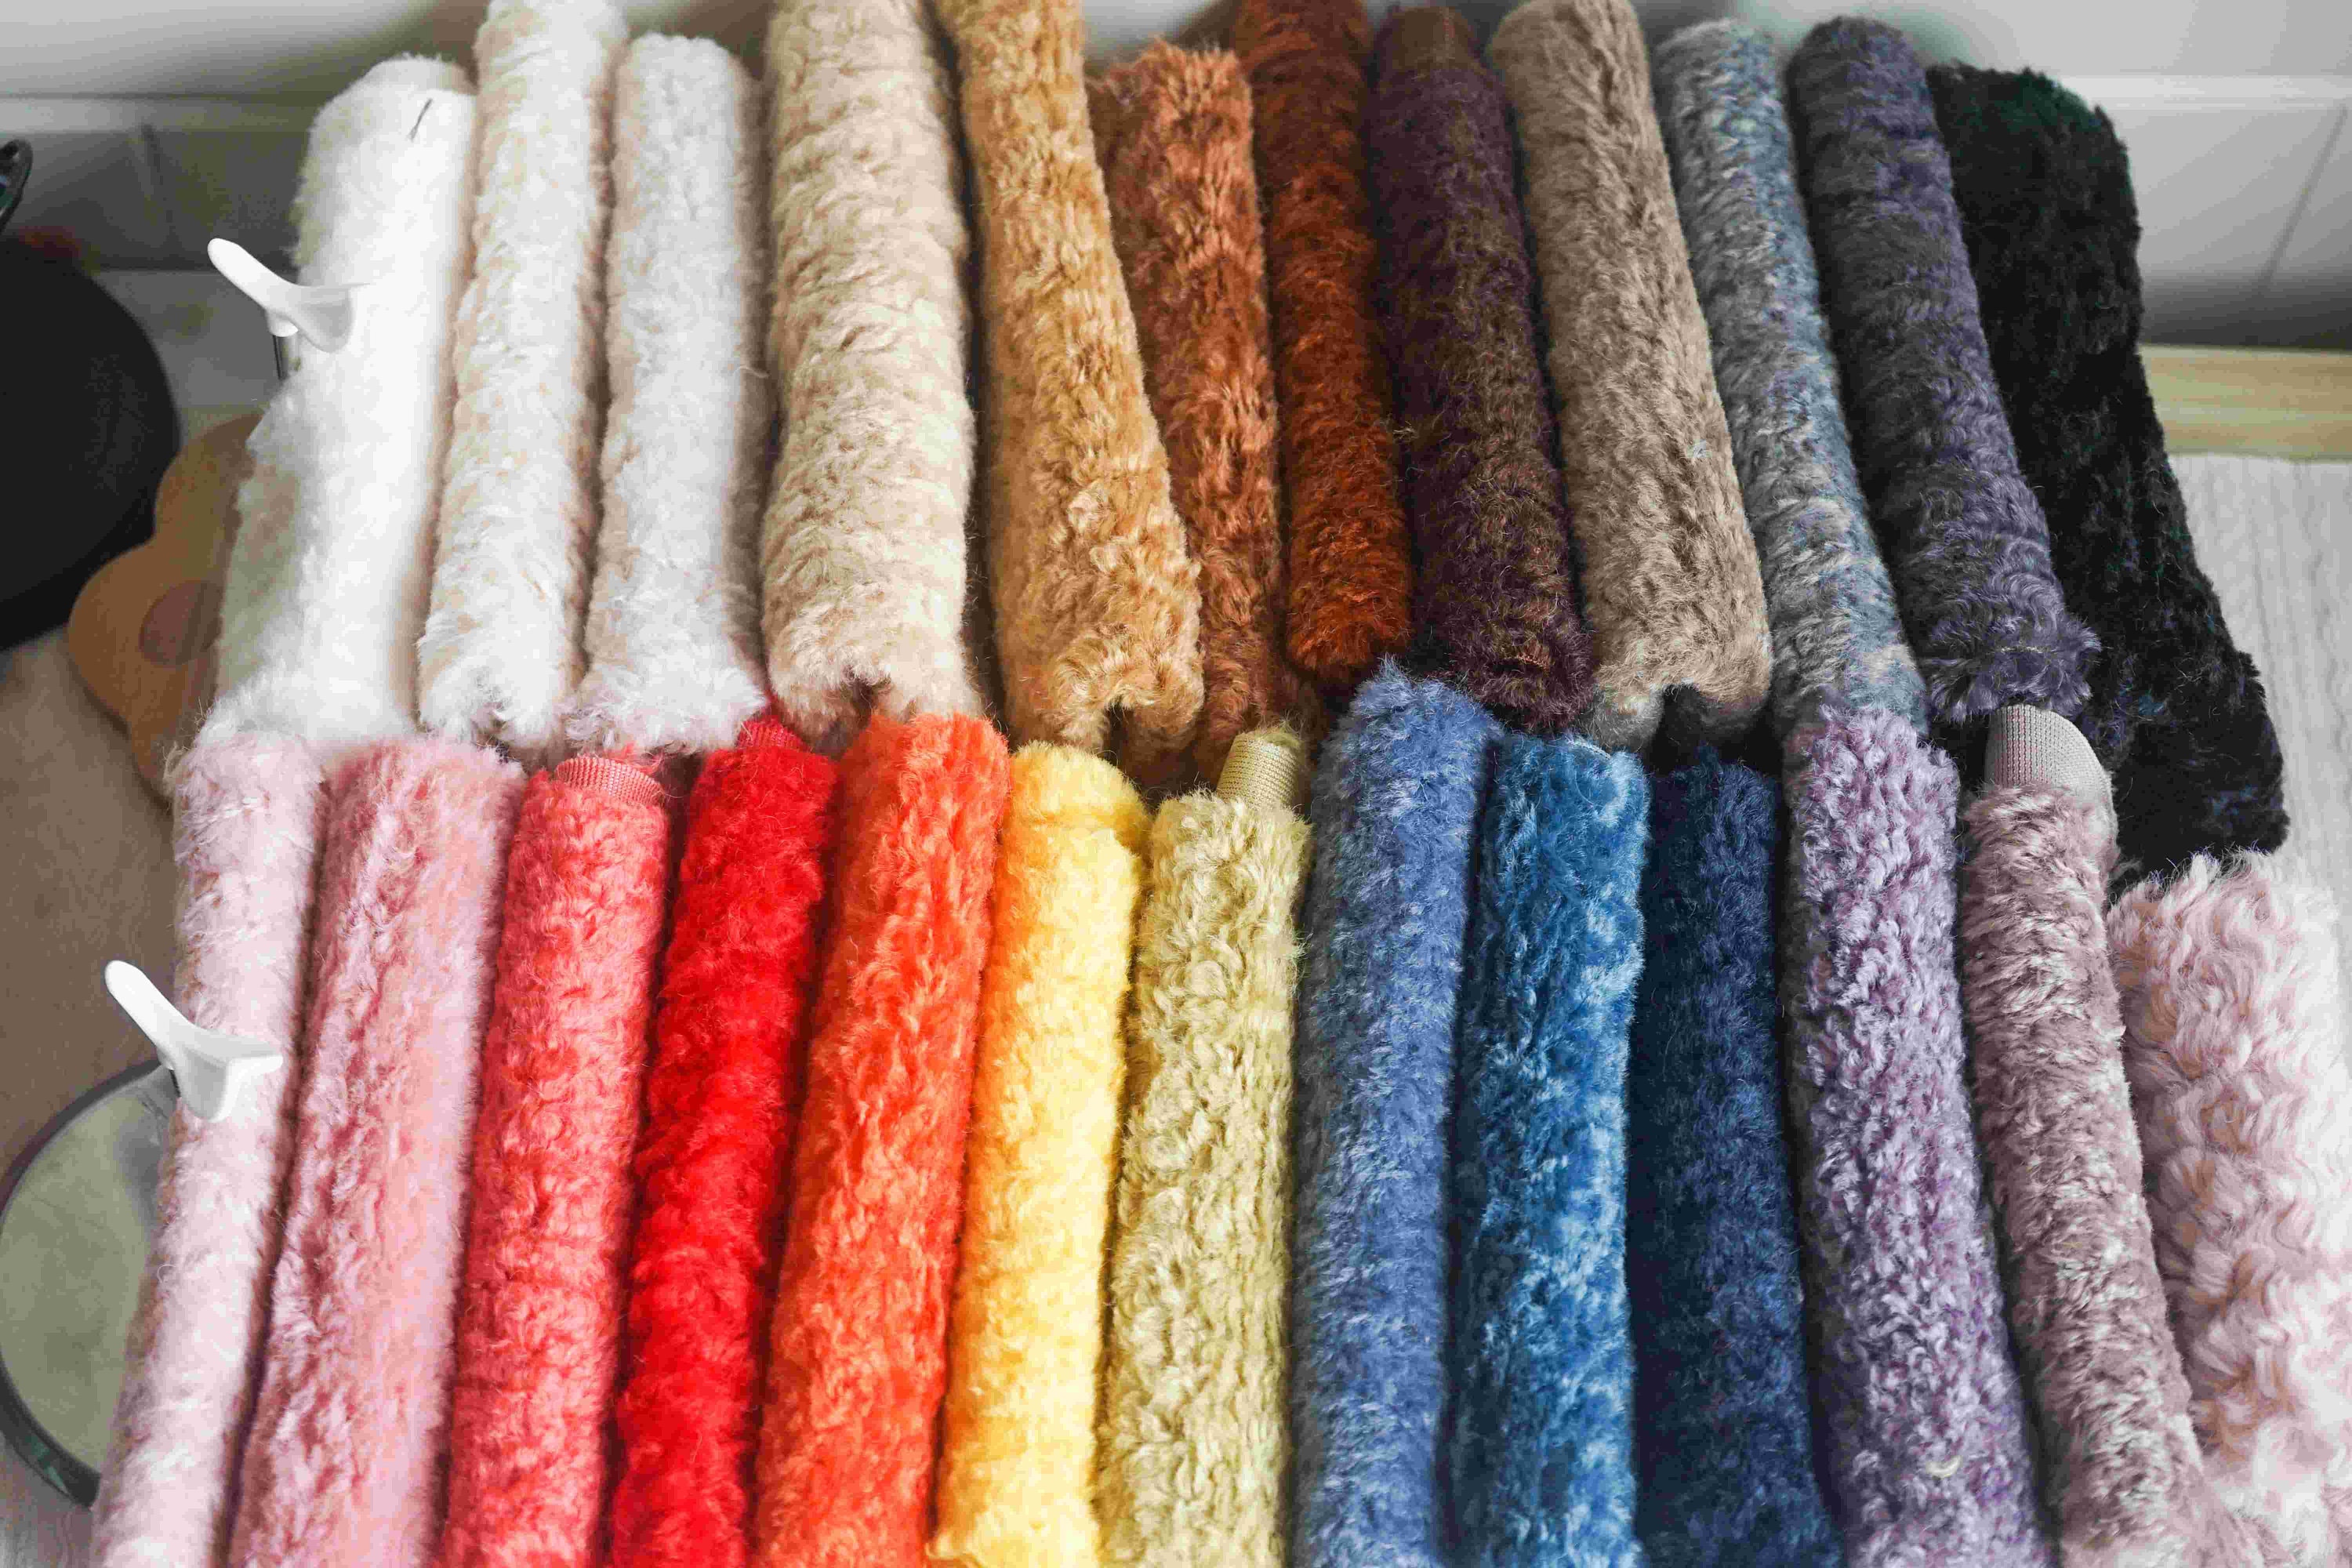 1 Mm Smooth Cuddle Minky Fabric, Plush Fabric, Solid Minky Fabric, Choose  From 31 Colors, Microfiber, Fabric by the Yard / 22857 